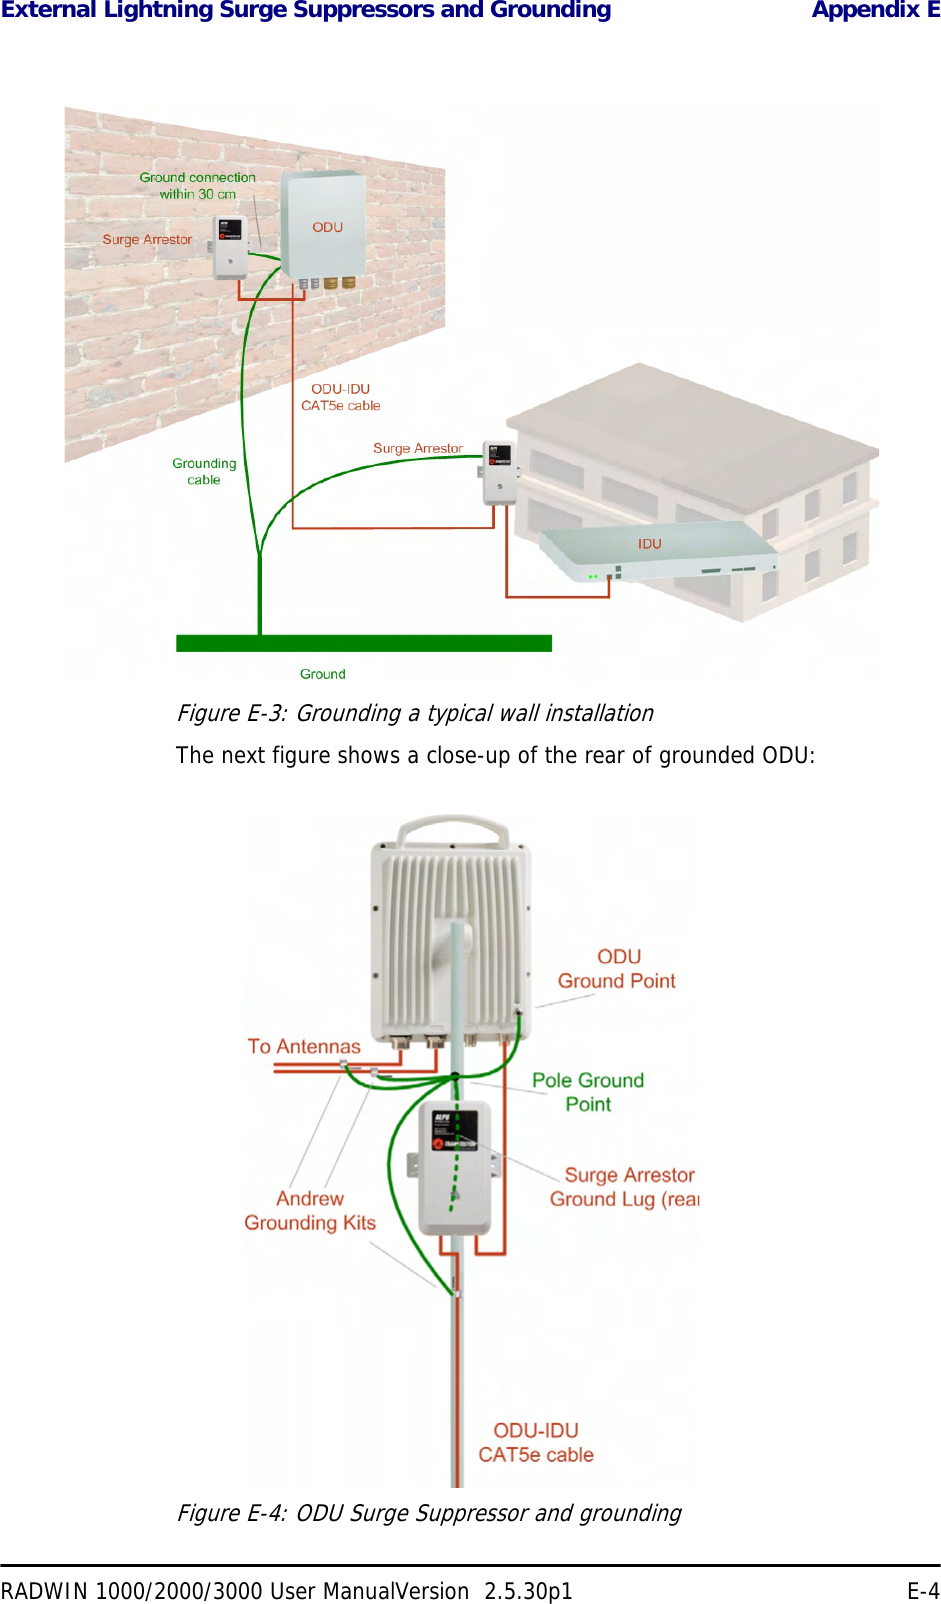 External Lightning Surge Suppressors and Grounding Appendix ERADWIN 1000/2000/3000 User ManualVersion  2.5.30p1 E-4Figure E-3: Grounding a typical wall installationThe next figure shows a close-up of the rear of grounded ODU:Figure E-4: ODU Surge Suppressor and grounding